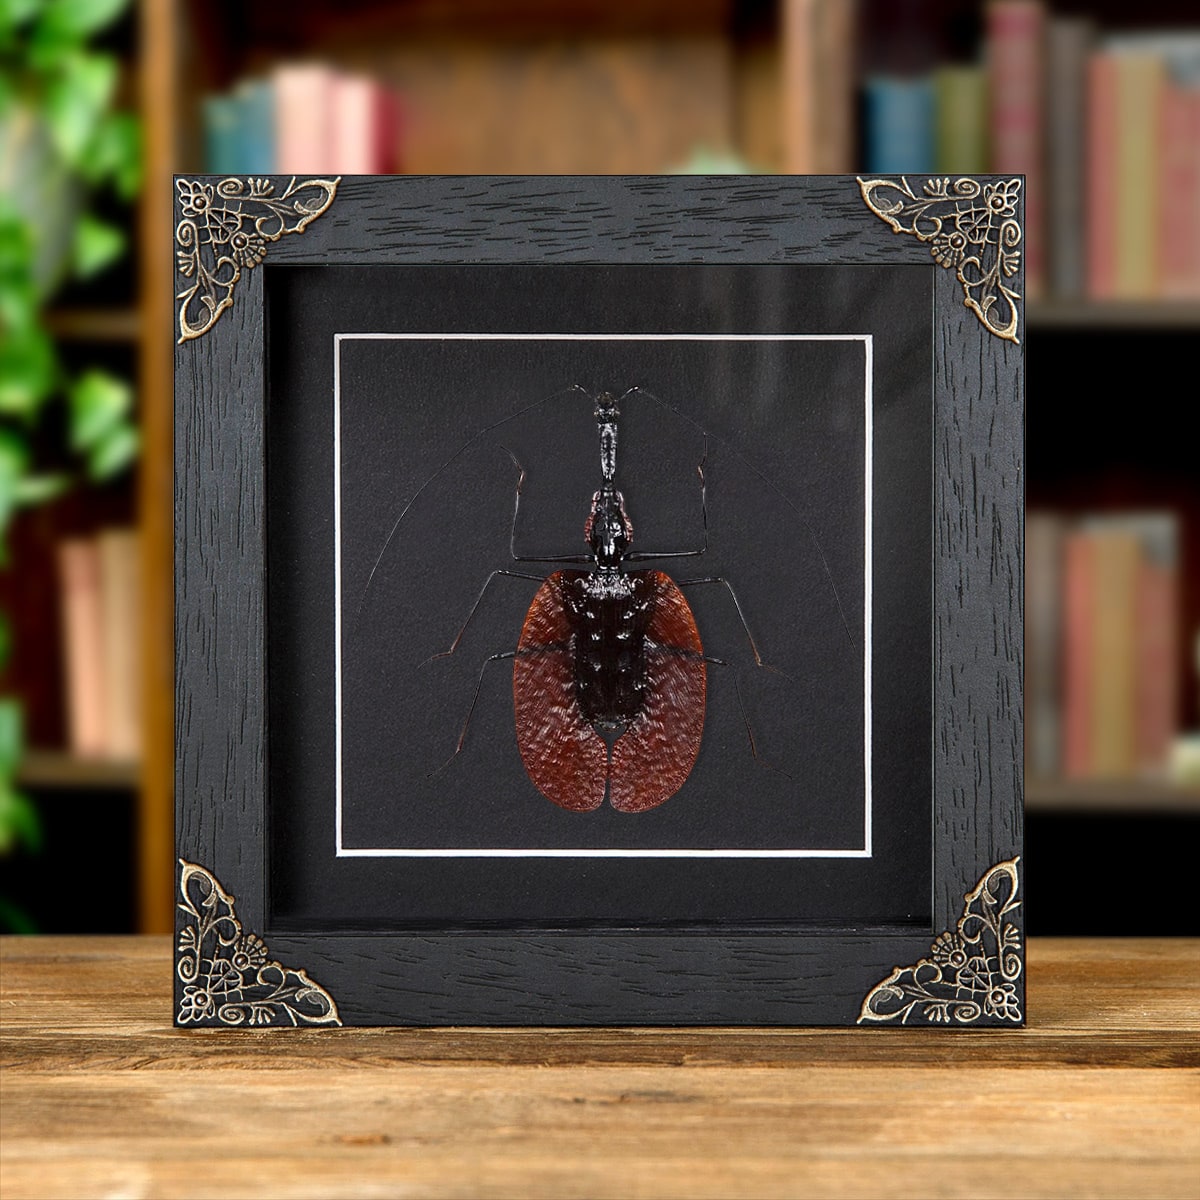 Minibeast Violin Beetle in Baroque Style Frame (Mormolyce phyllodes)